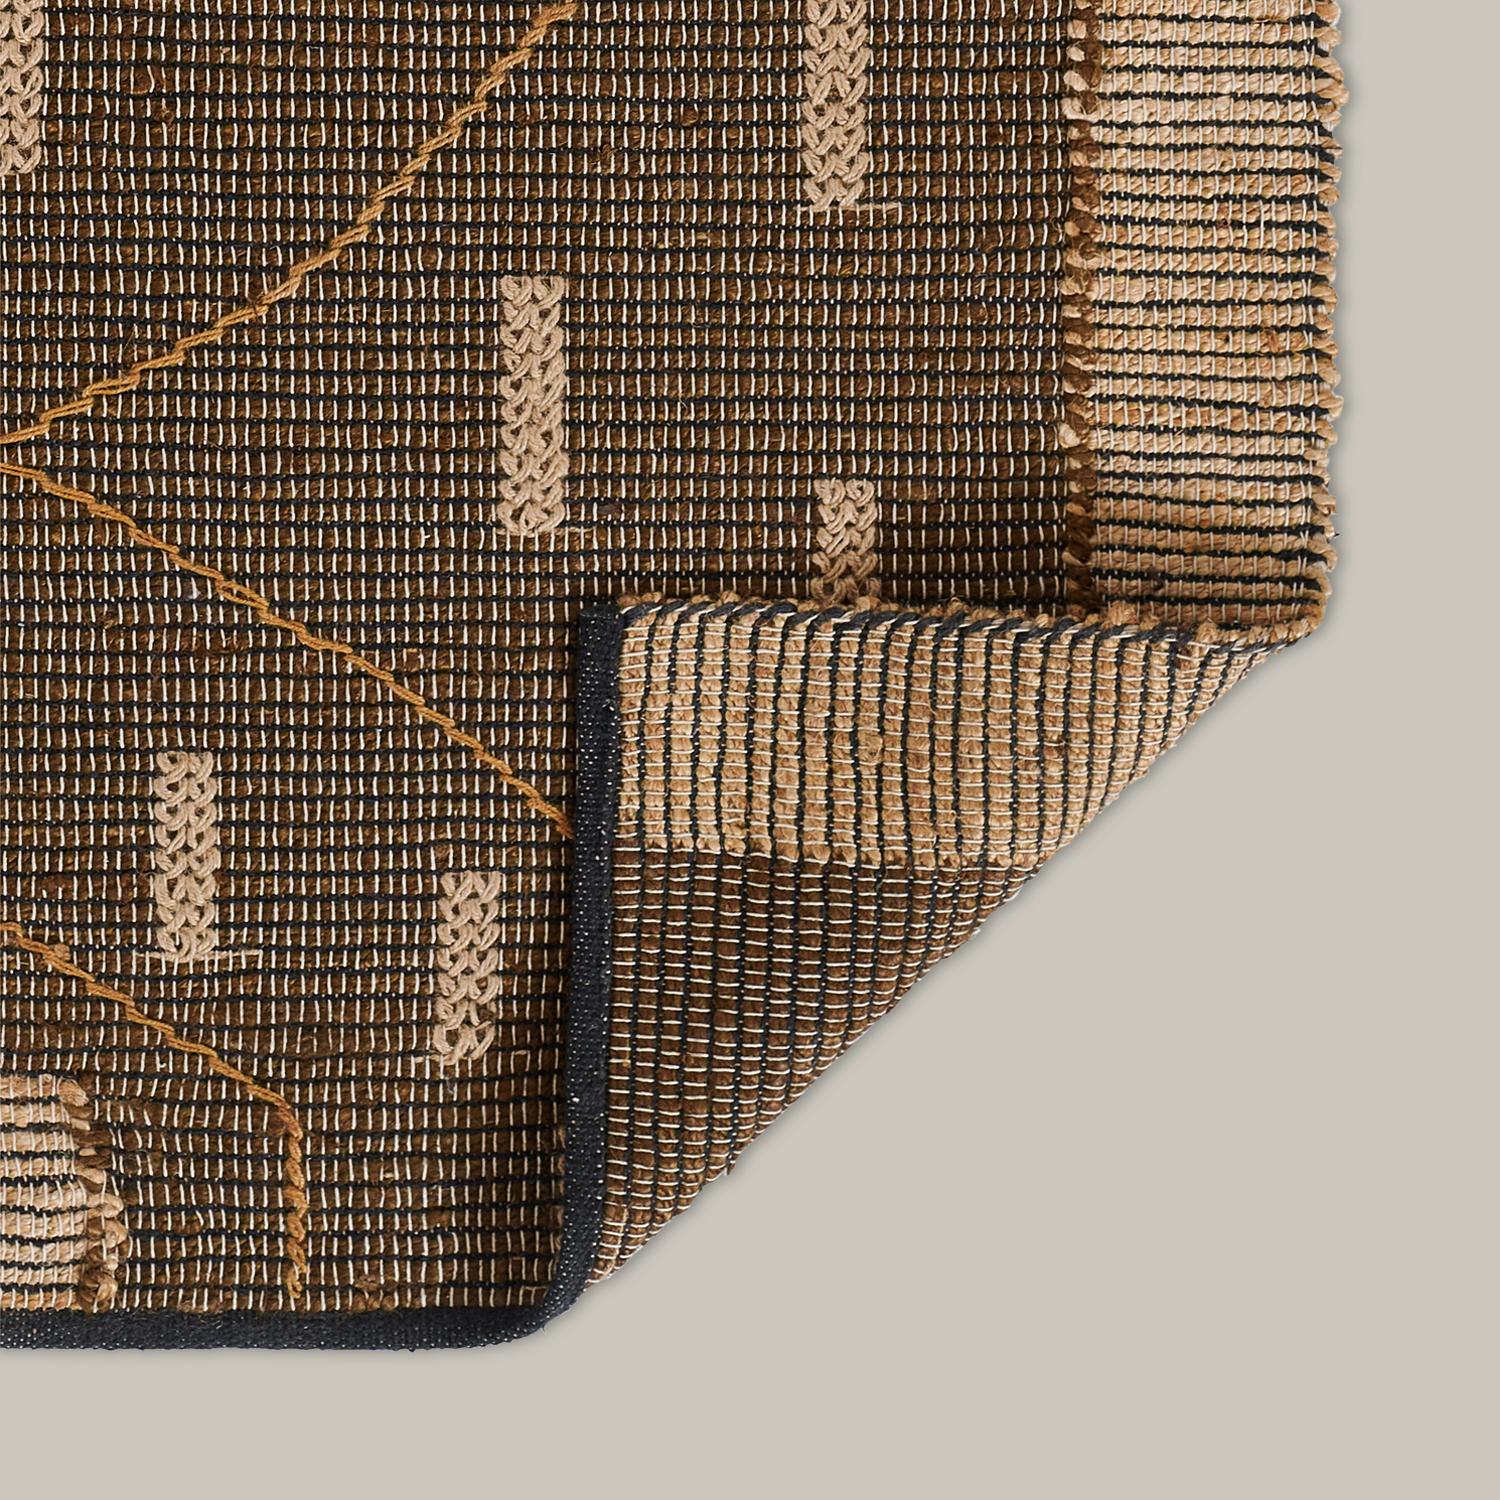 “Pontoise Mathieu” Handwoven Jute Rug by Christiane Lemieux In New Condition For Sale In New York, NY